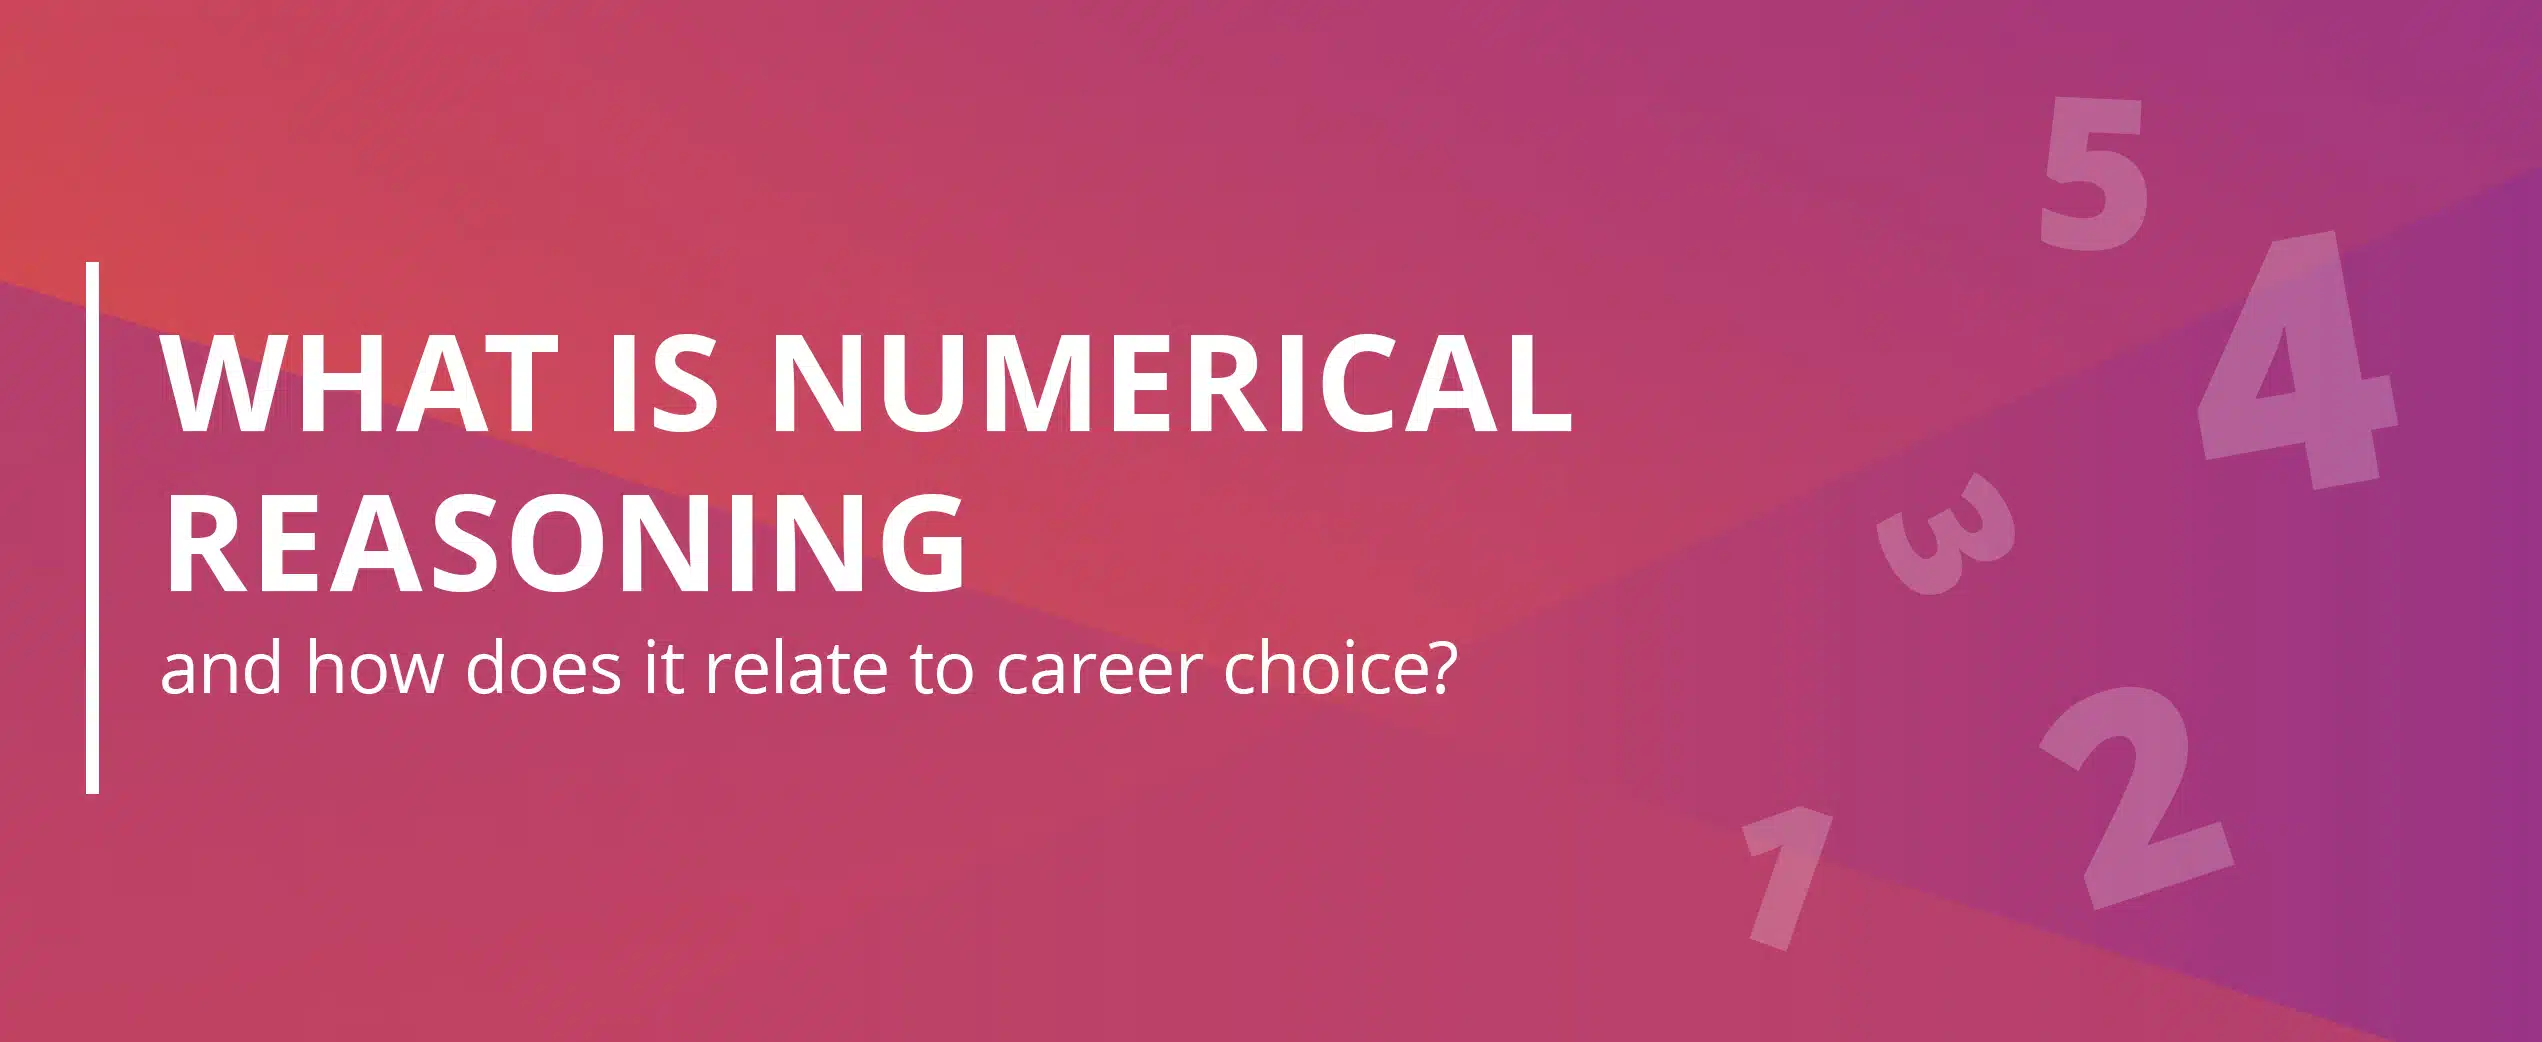 What is numerical reasoning and how does it relate to career choice graphic header